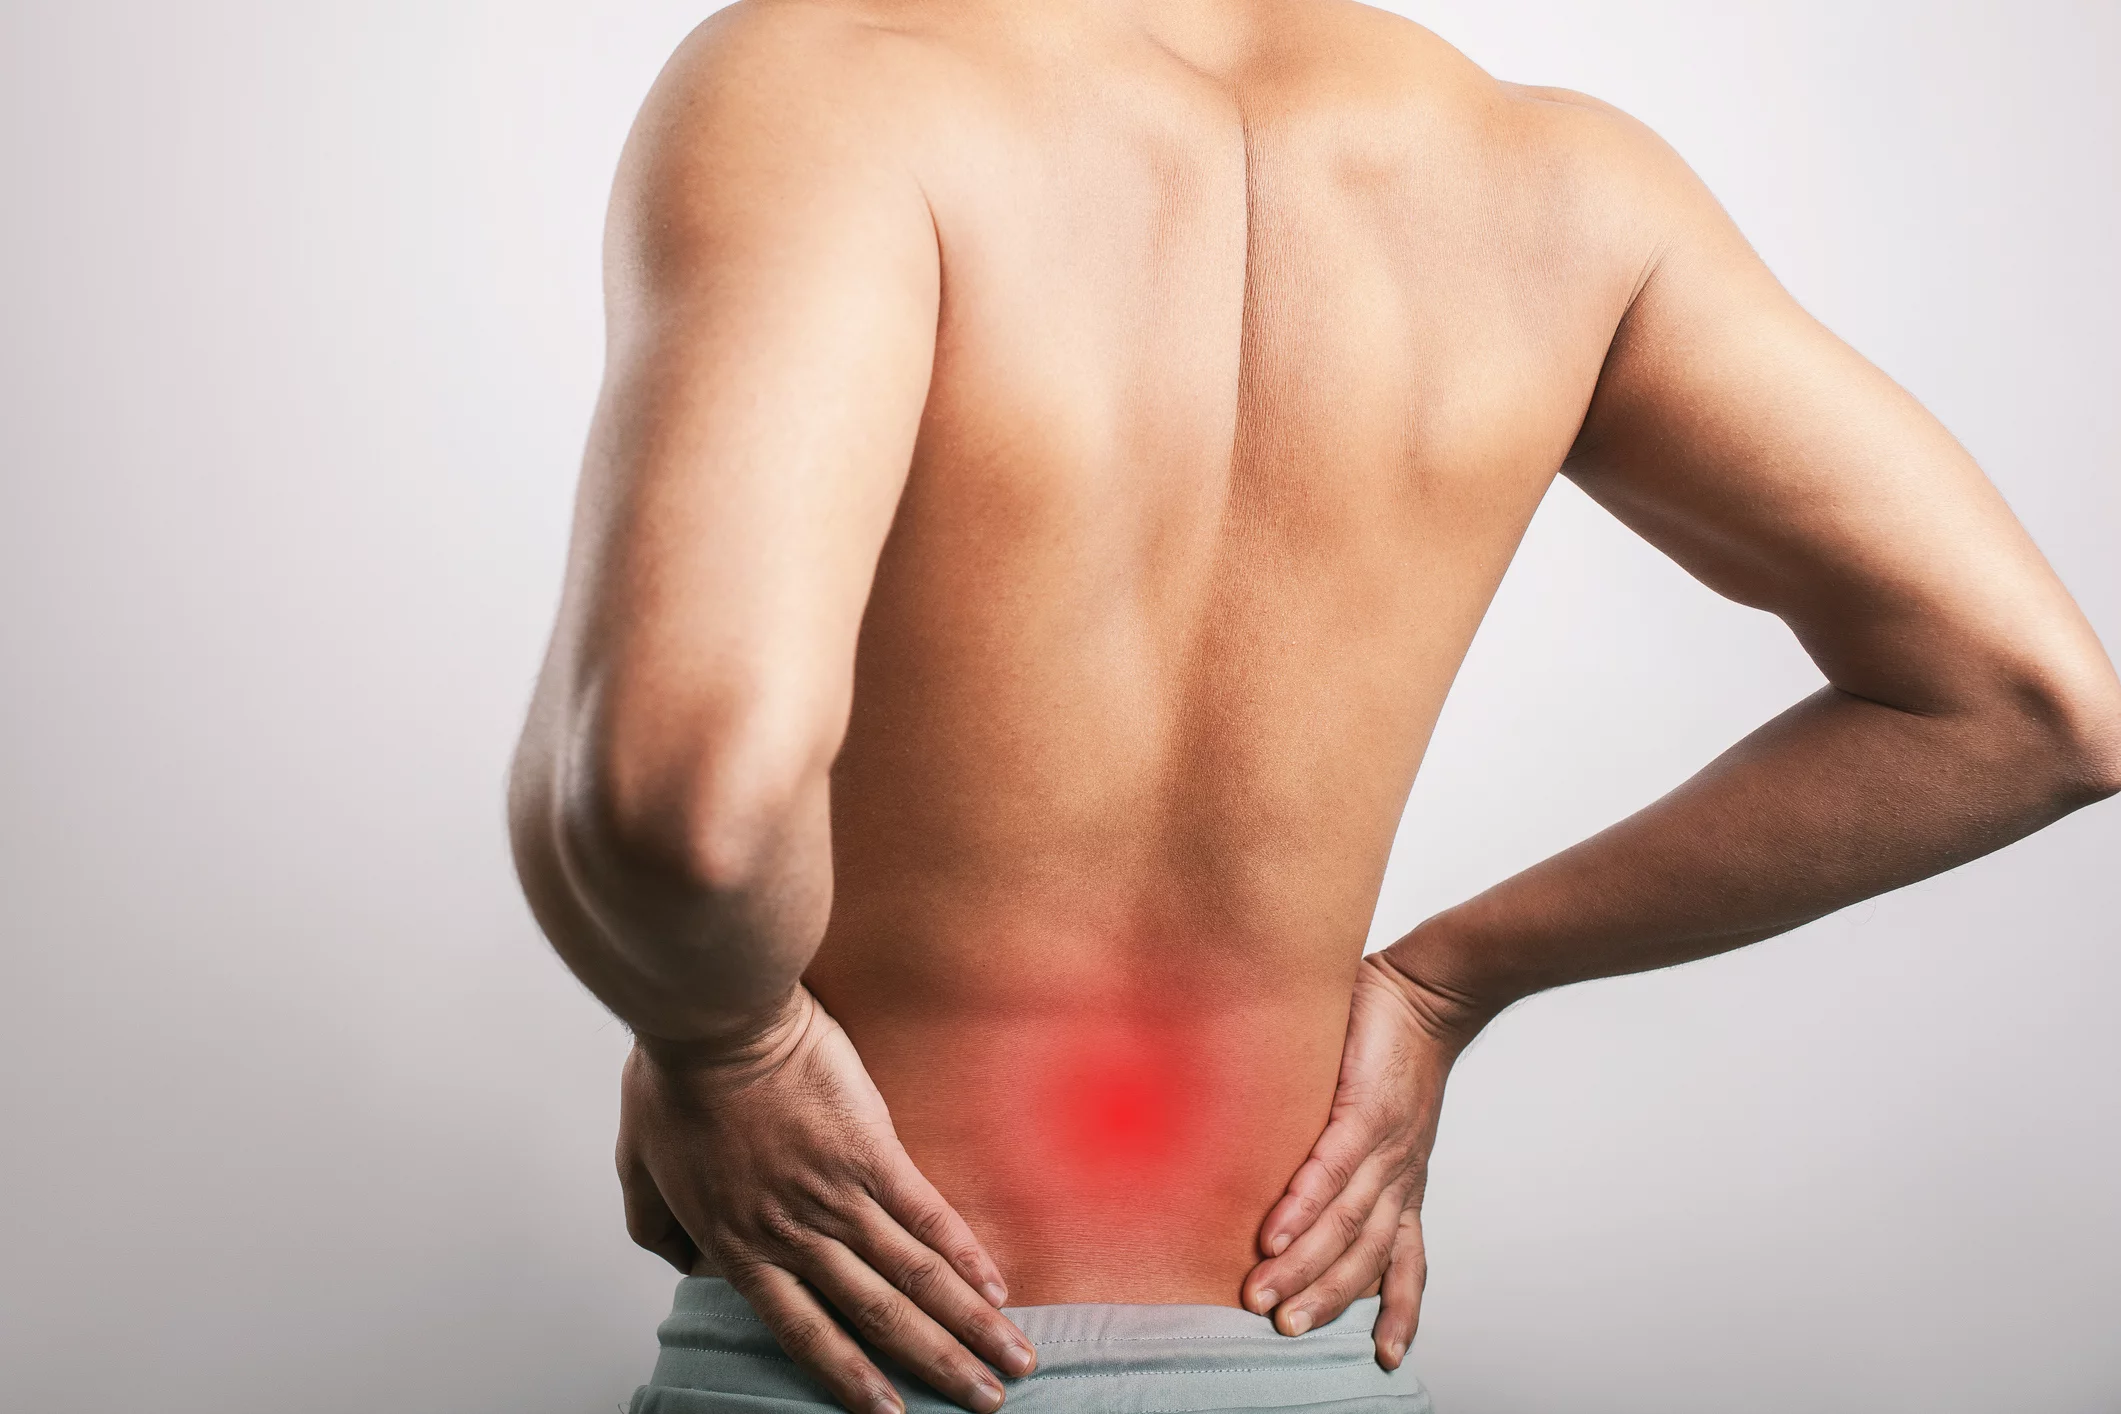 Lower back pain treatment and relief: lower back exercises and stretch